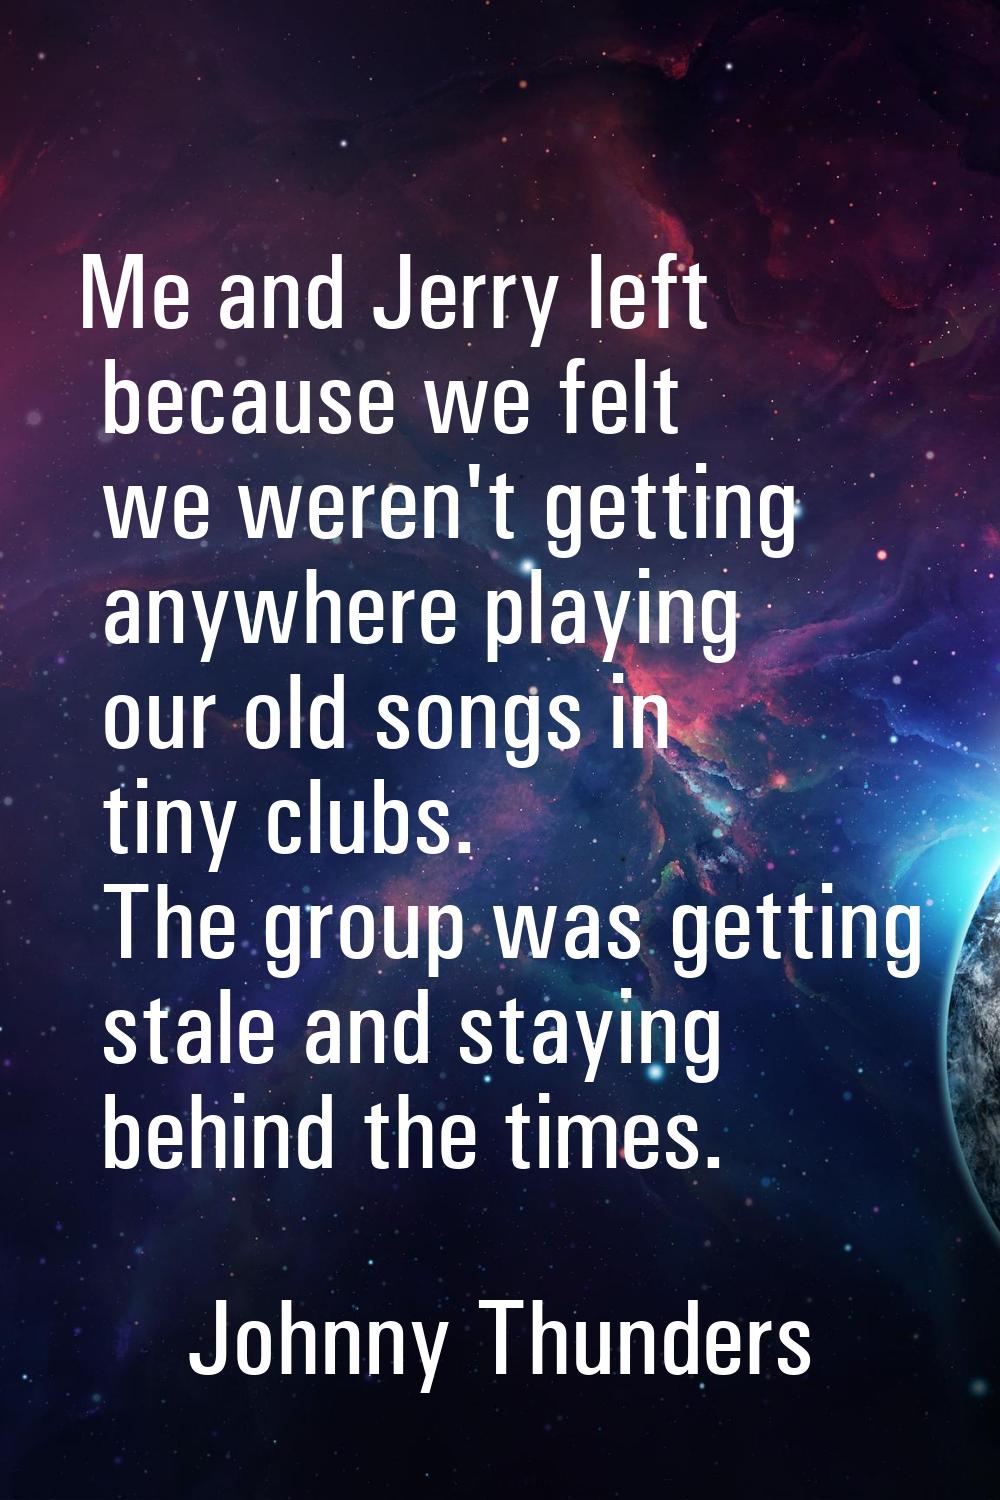 Me and Jerry left because we felt we weren't getting anywhere playing our old songs in tiny clubs. 